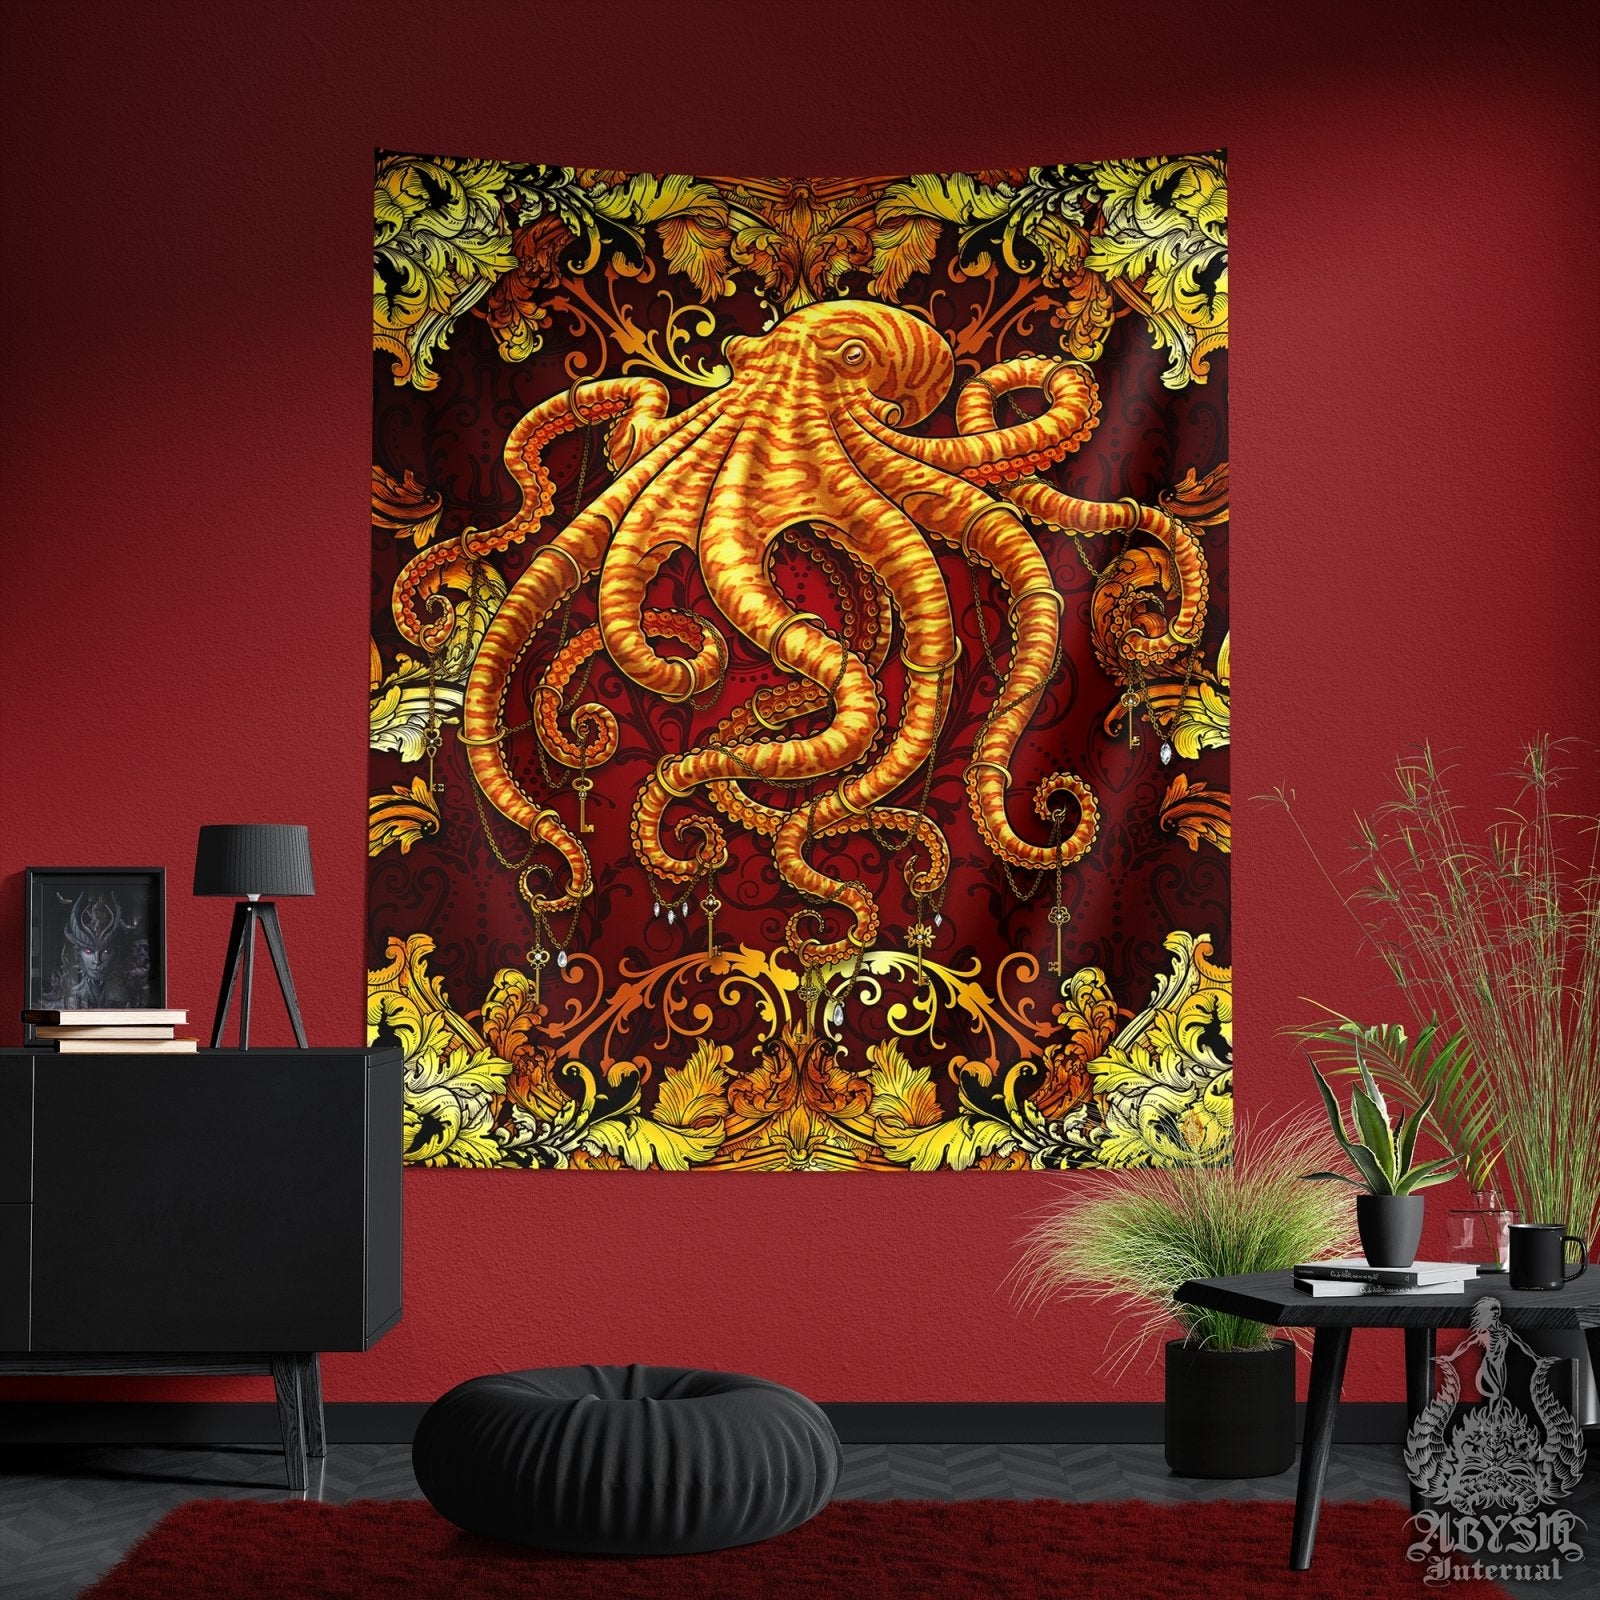 Beach House Tapestry, Octopus Wall Hanging, Ocean Home Decor, Art Print - Gold Red - Abysm Internal